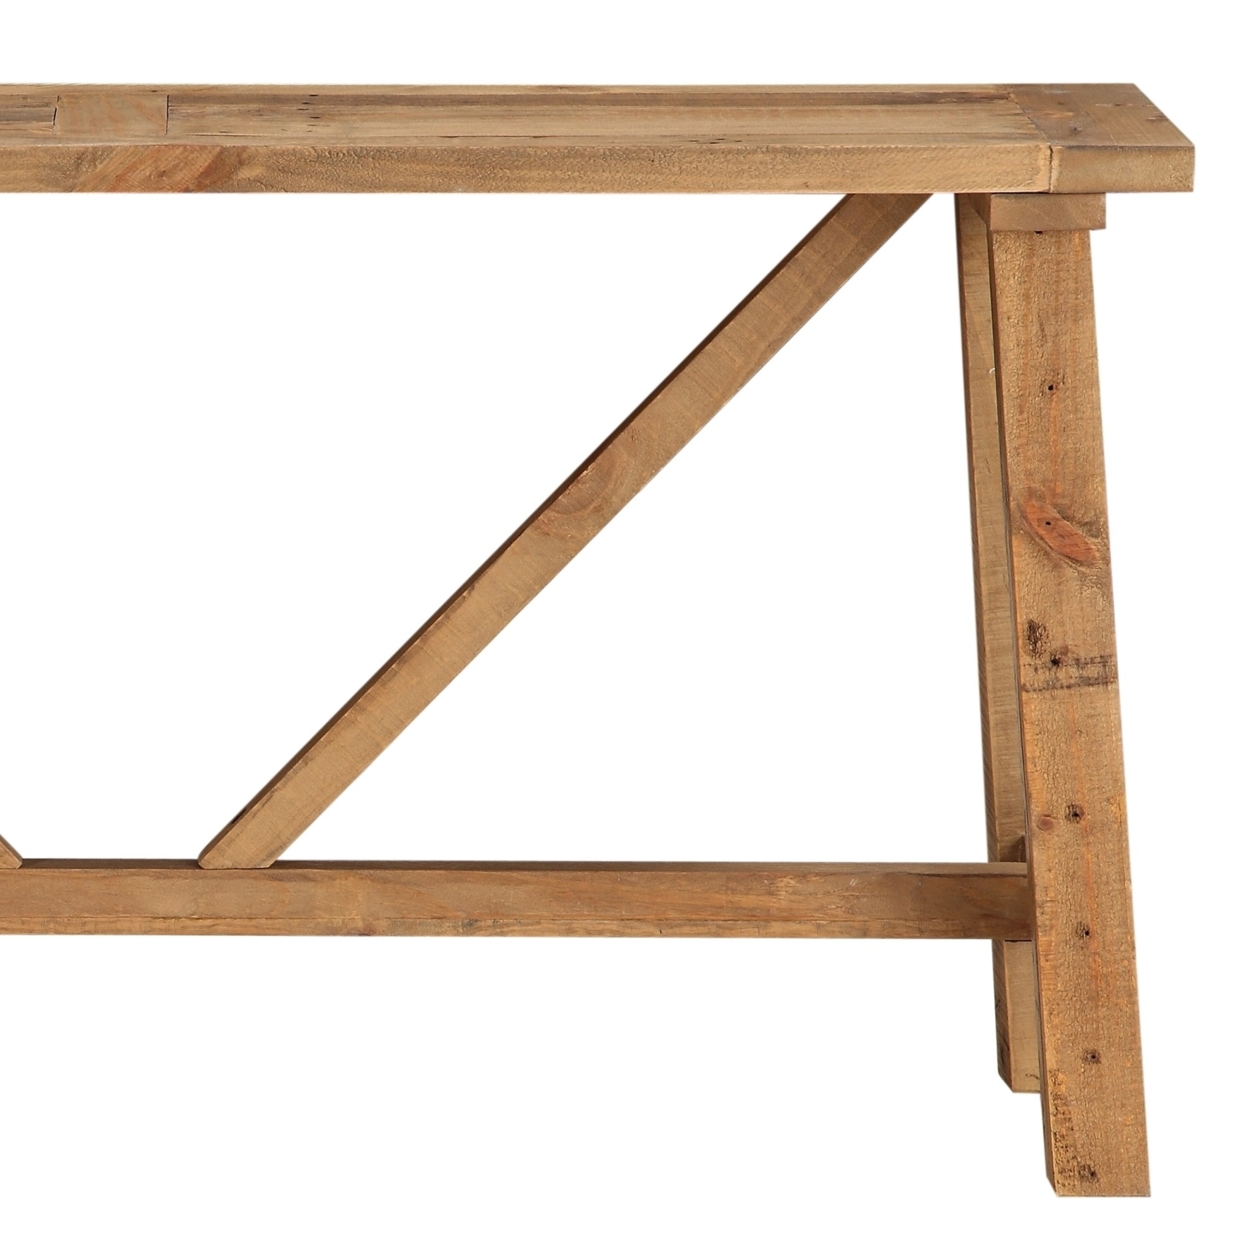 Pine Console Table With Trestle Reinforced Sawhorse Base, Brown- Saltoro Sherpi